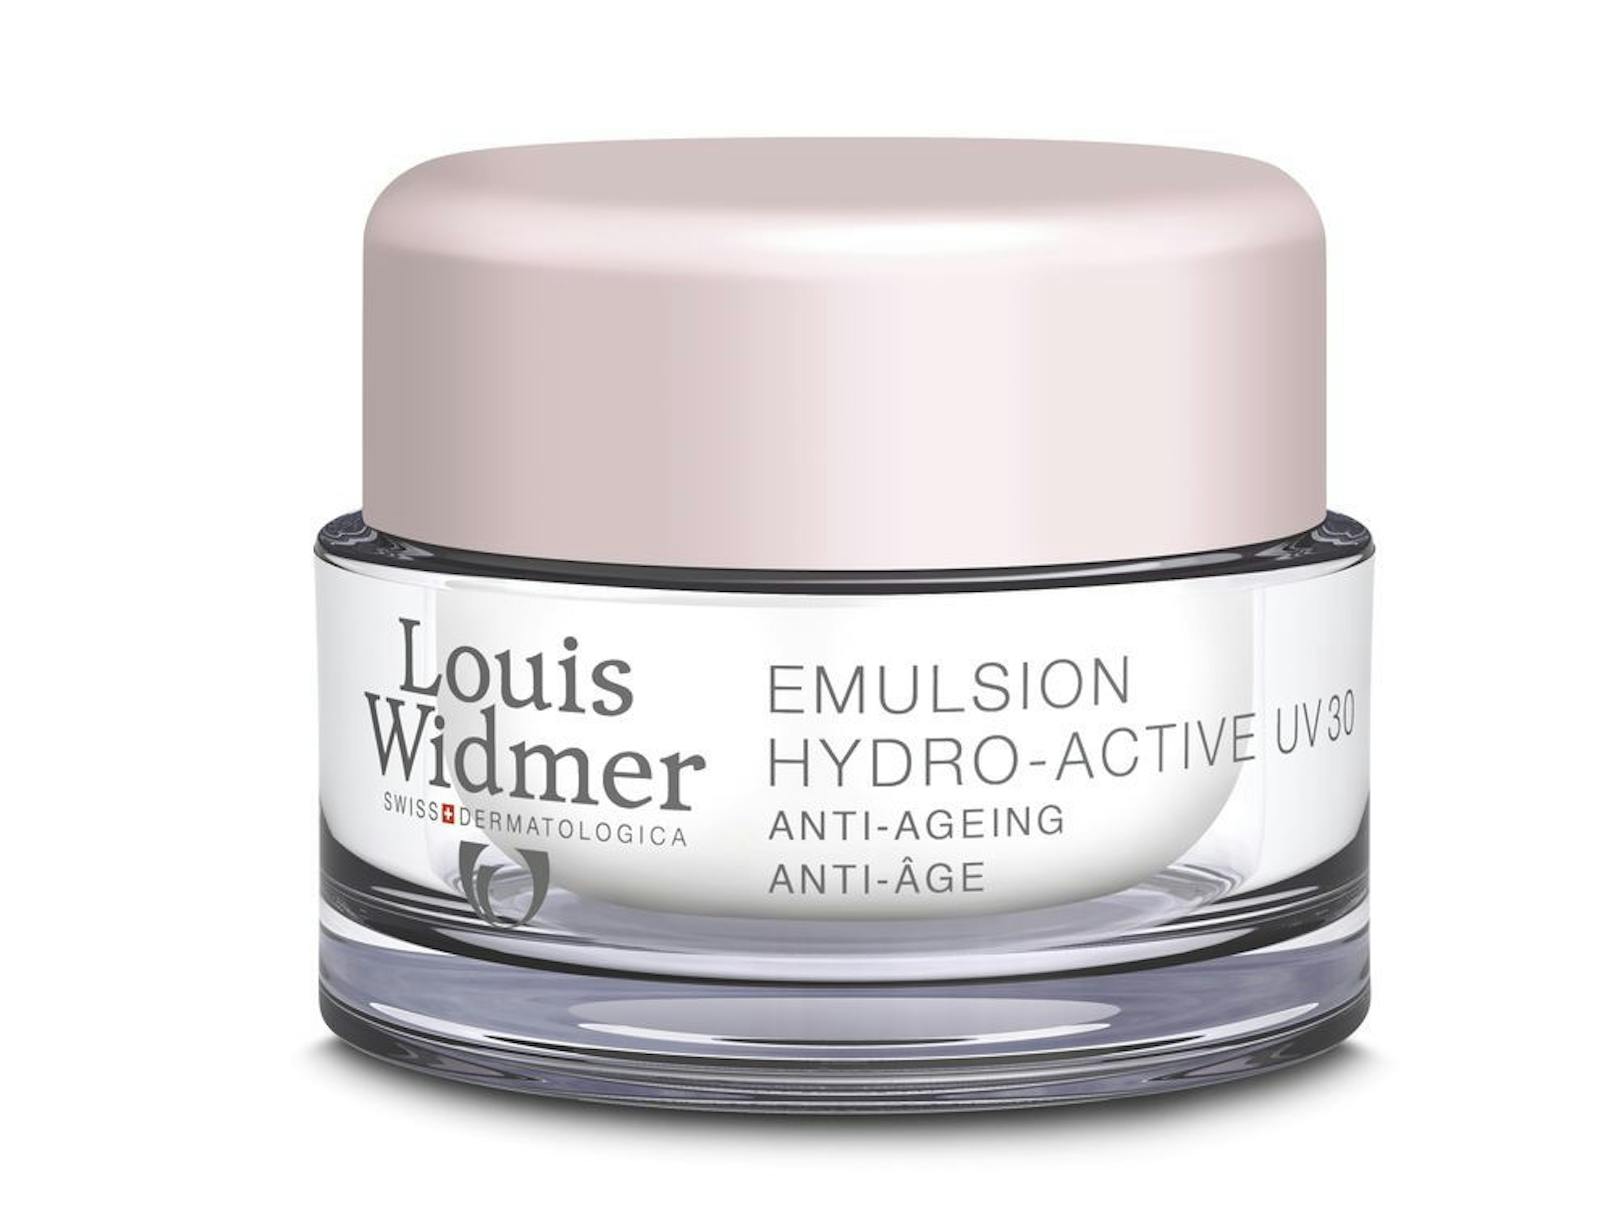 Louis Widmer Emulsion Hydro-Active UV 30 Anti-Ageing